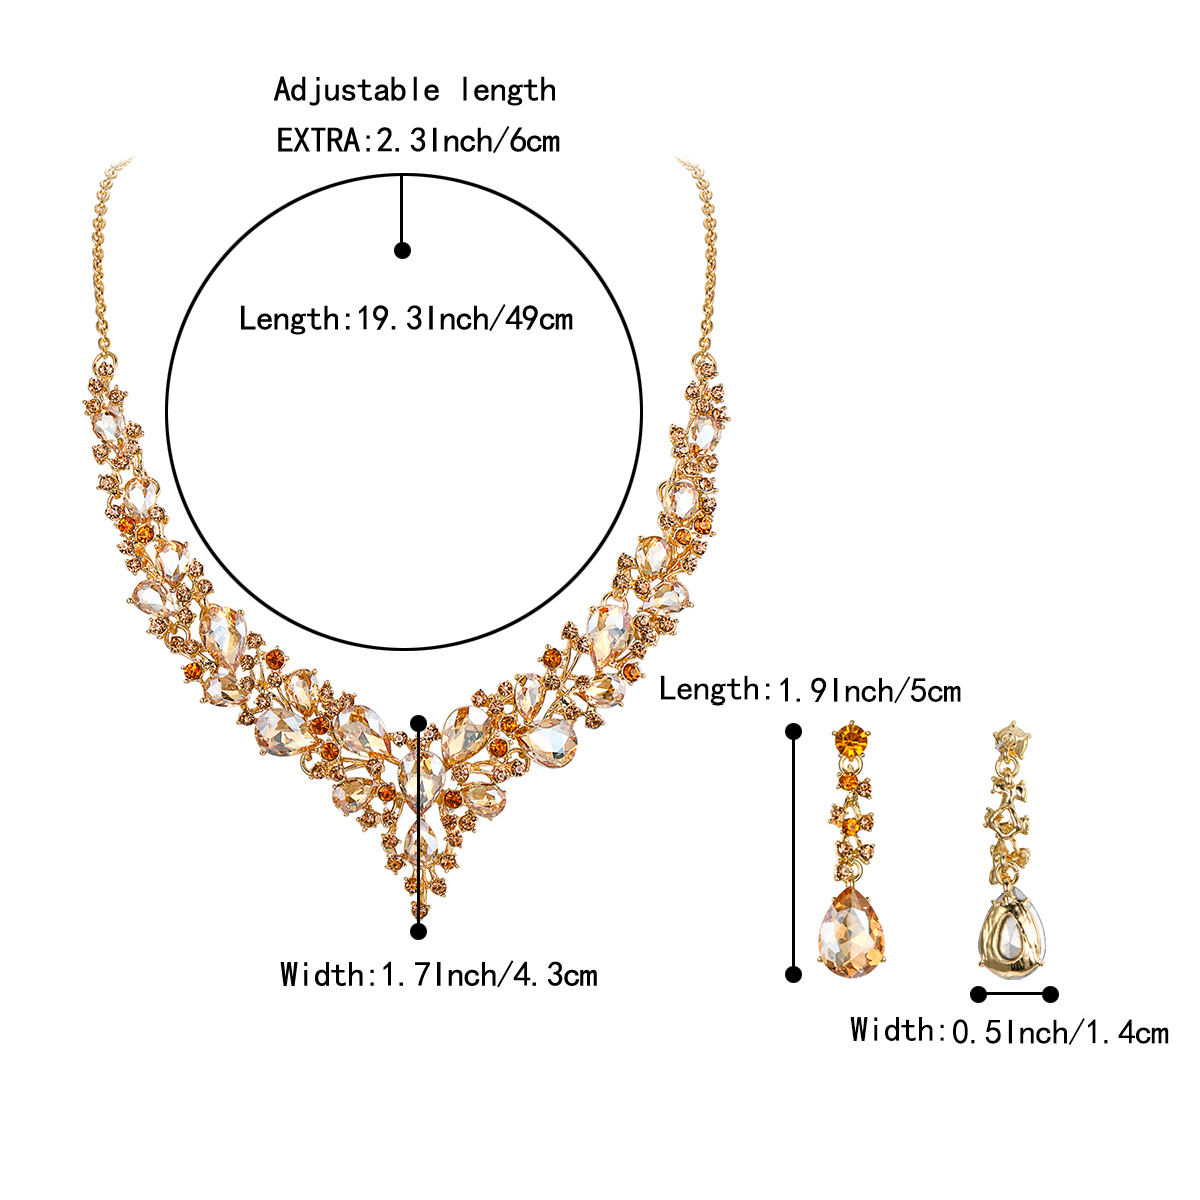 Wedure Wedding Bridal Necklace Earrings Jewelry Set for Women,, Austrian Crystal Teardrop Cluster Statement Necklace Dangle Earrings Set Champagne Gold-Toned - image 5 of 5